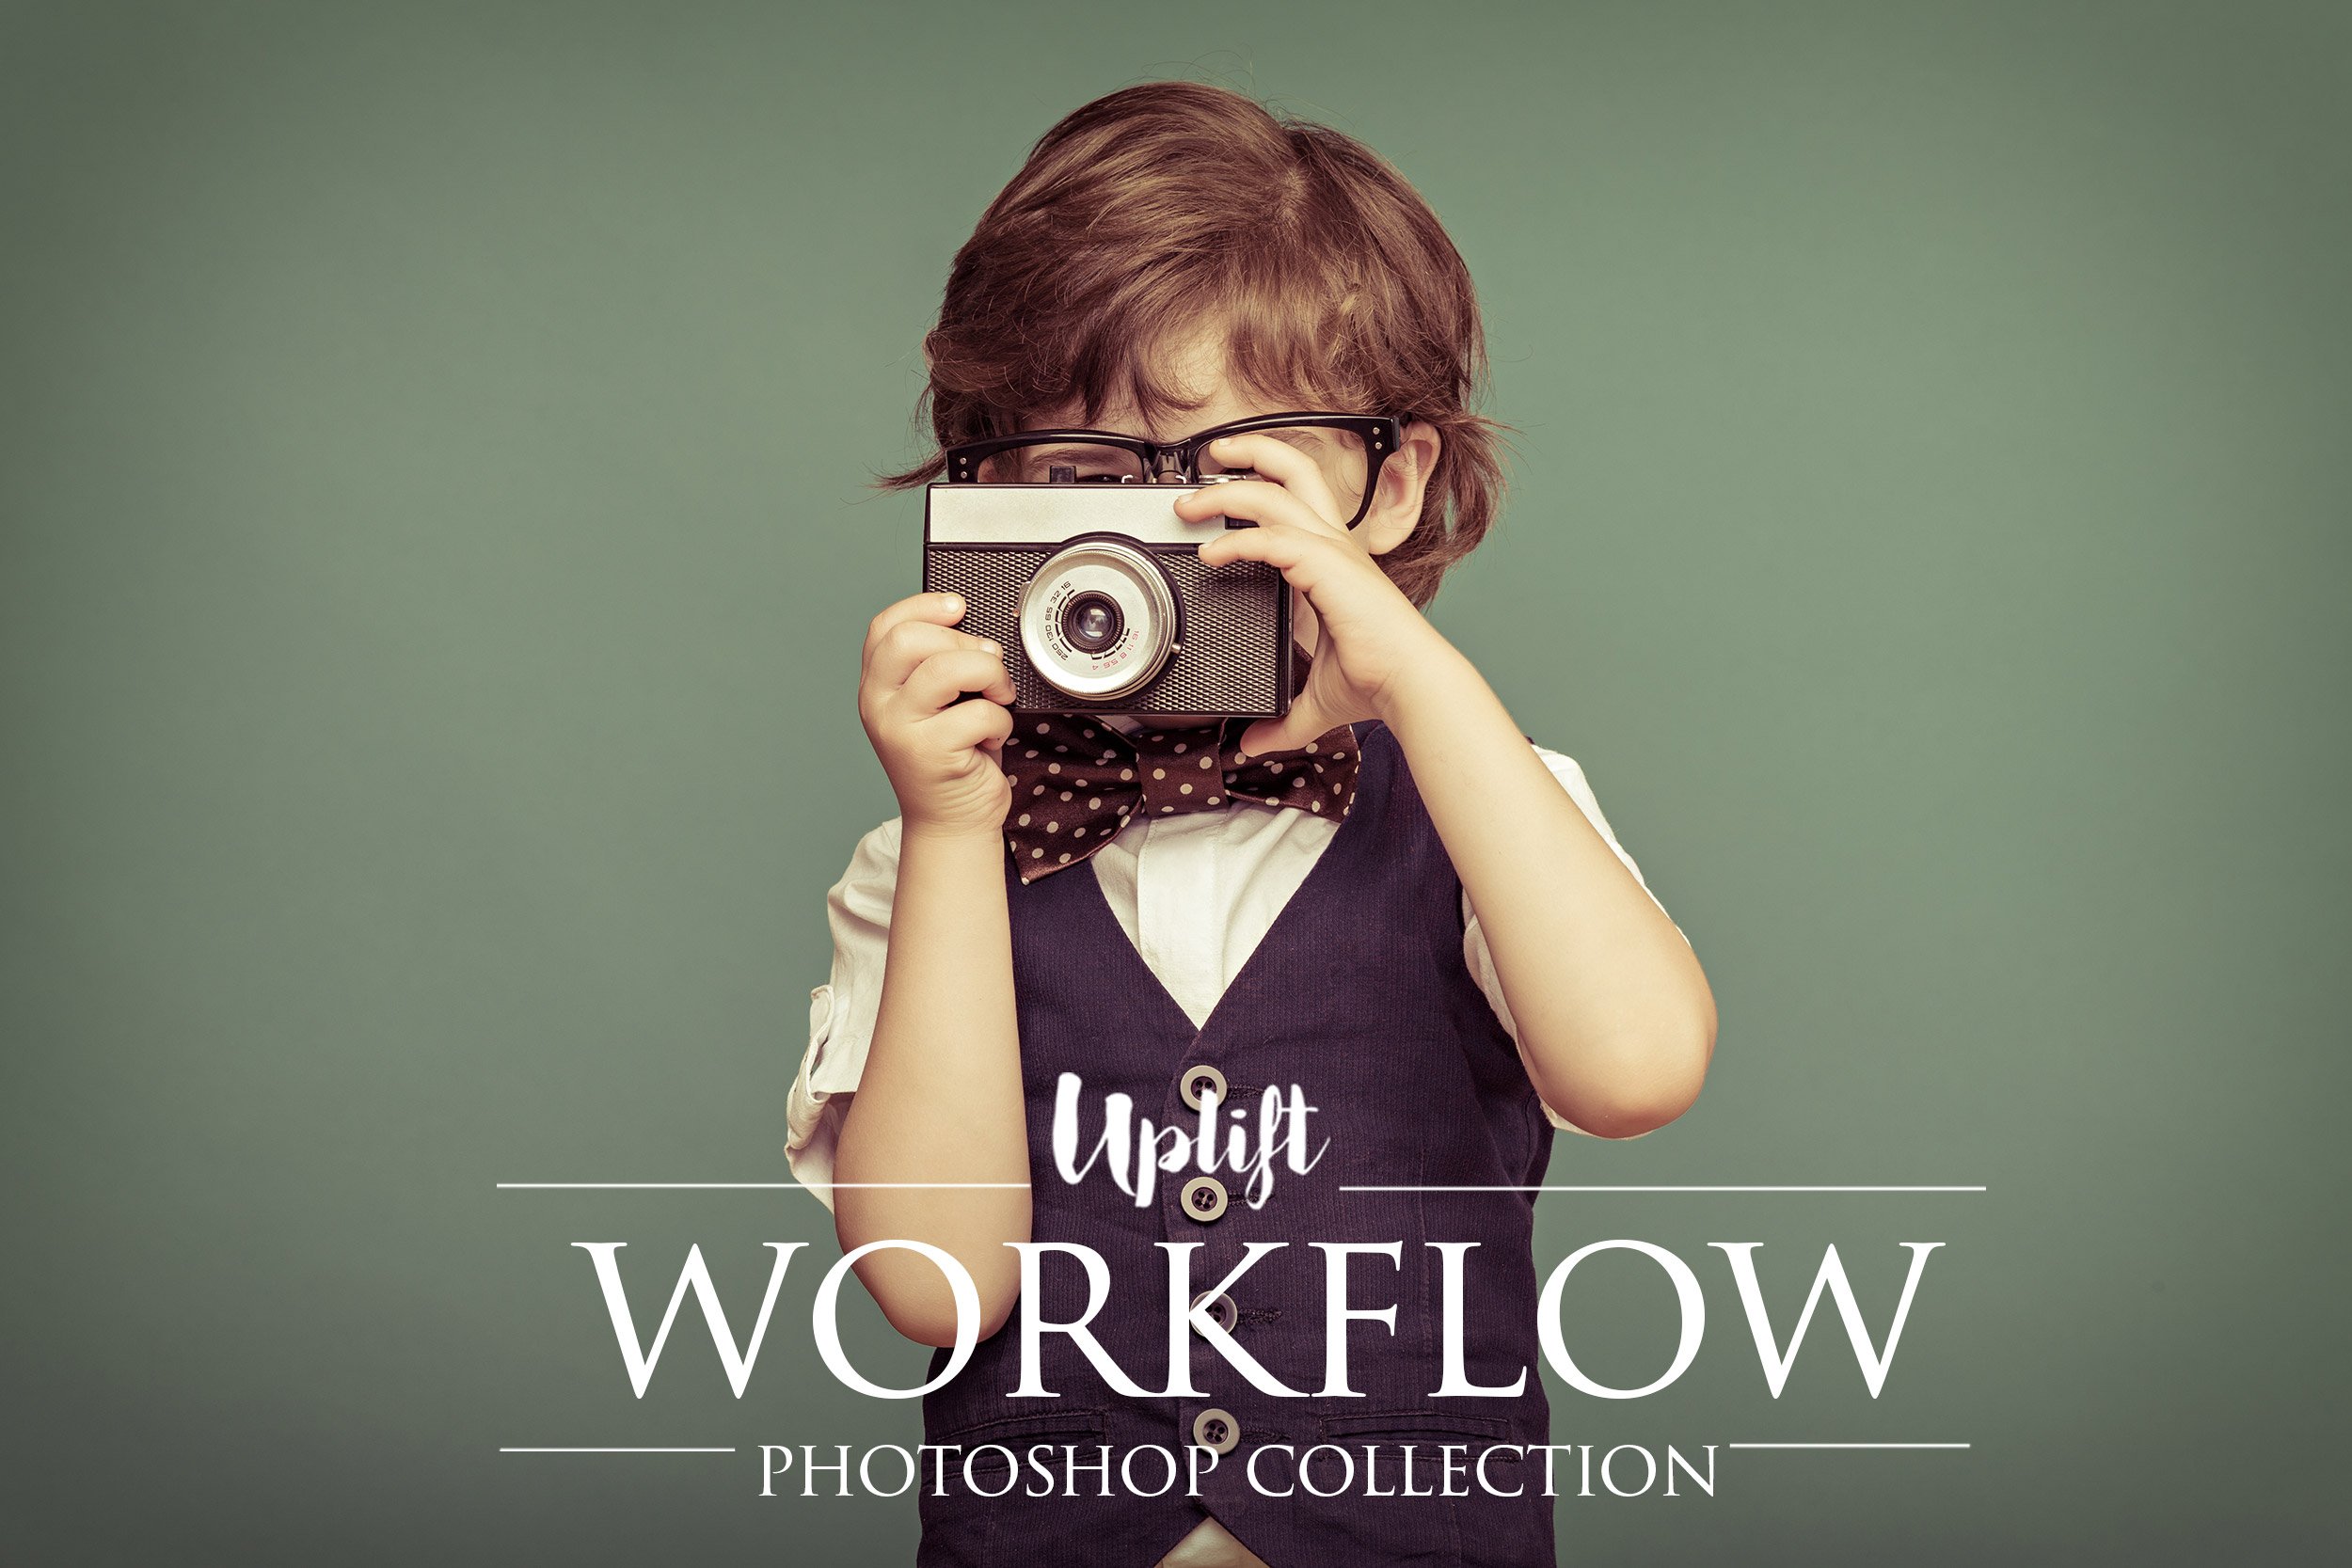 SALE! Photoshop WORKFLOW Collectioncover image.